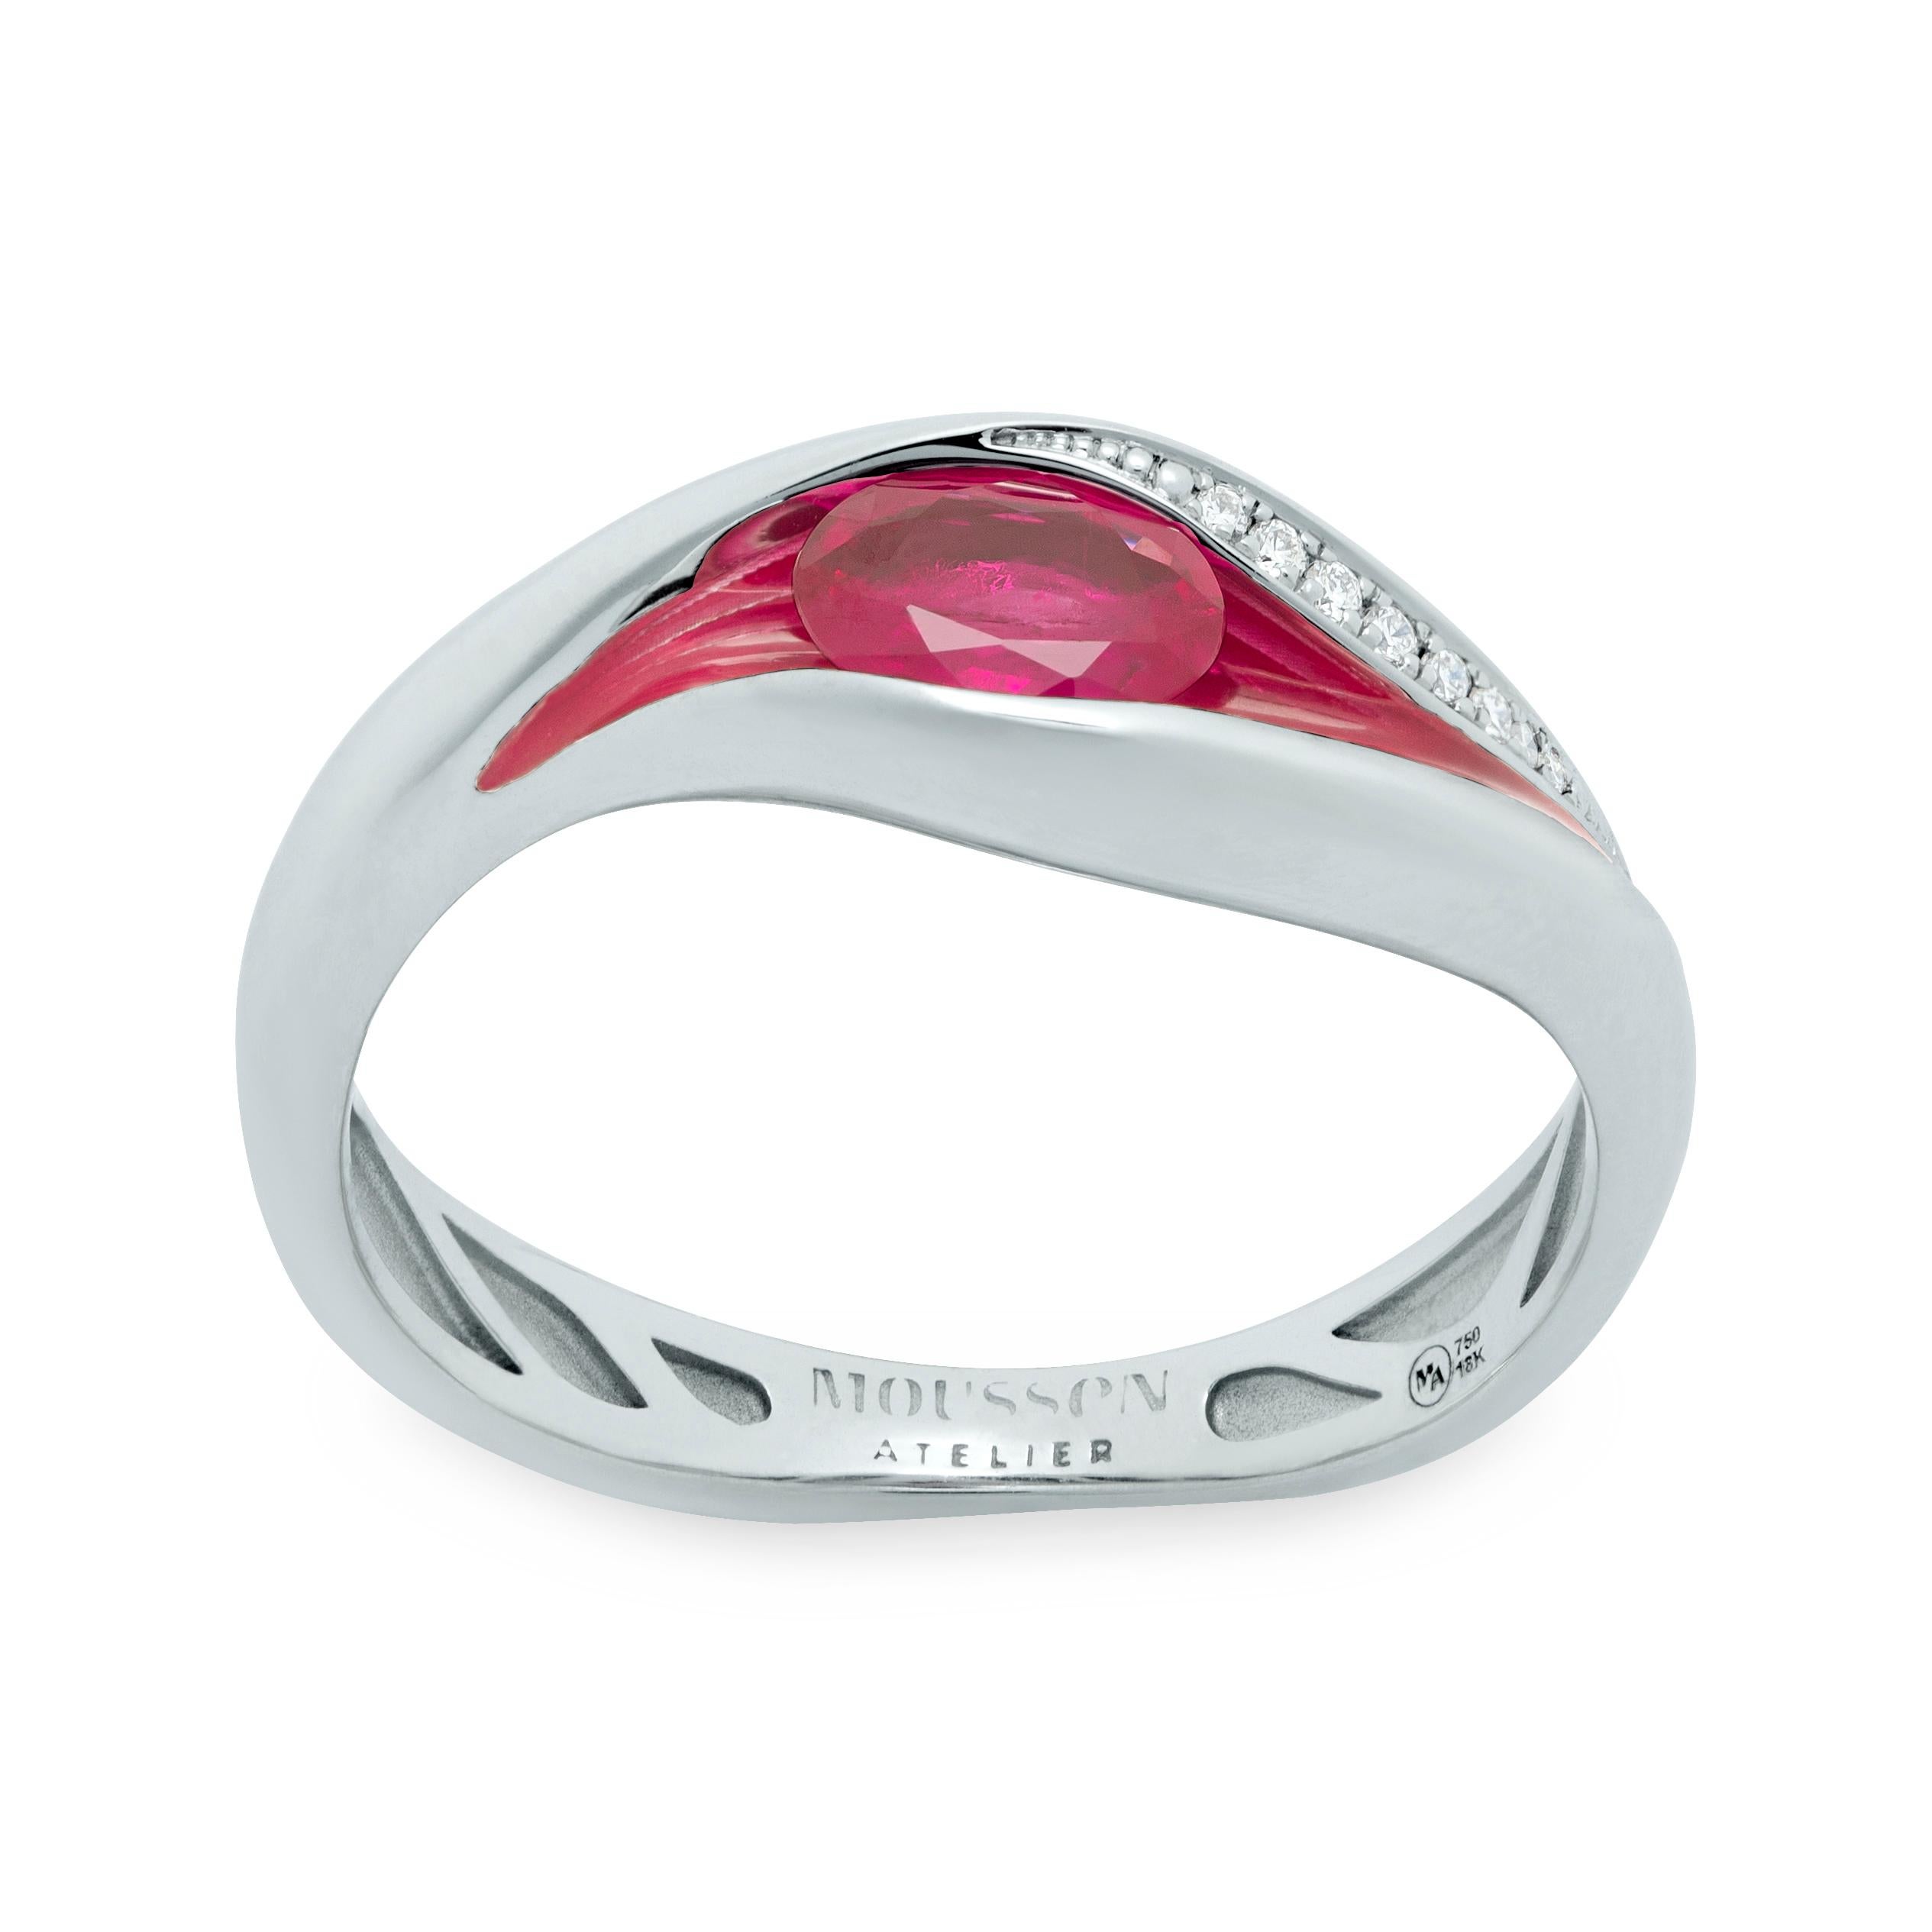 Ruby Diamonds Enamel 18 Karat White Gold Melted Colors Ring
Another Ring from our Melted Colors collection. As we can see, enamel is matched perfectly by our designers to the color of the central stones in order to create the effect of melting or